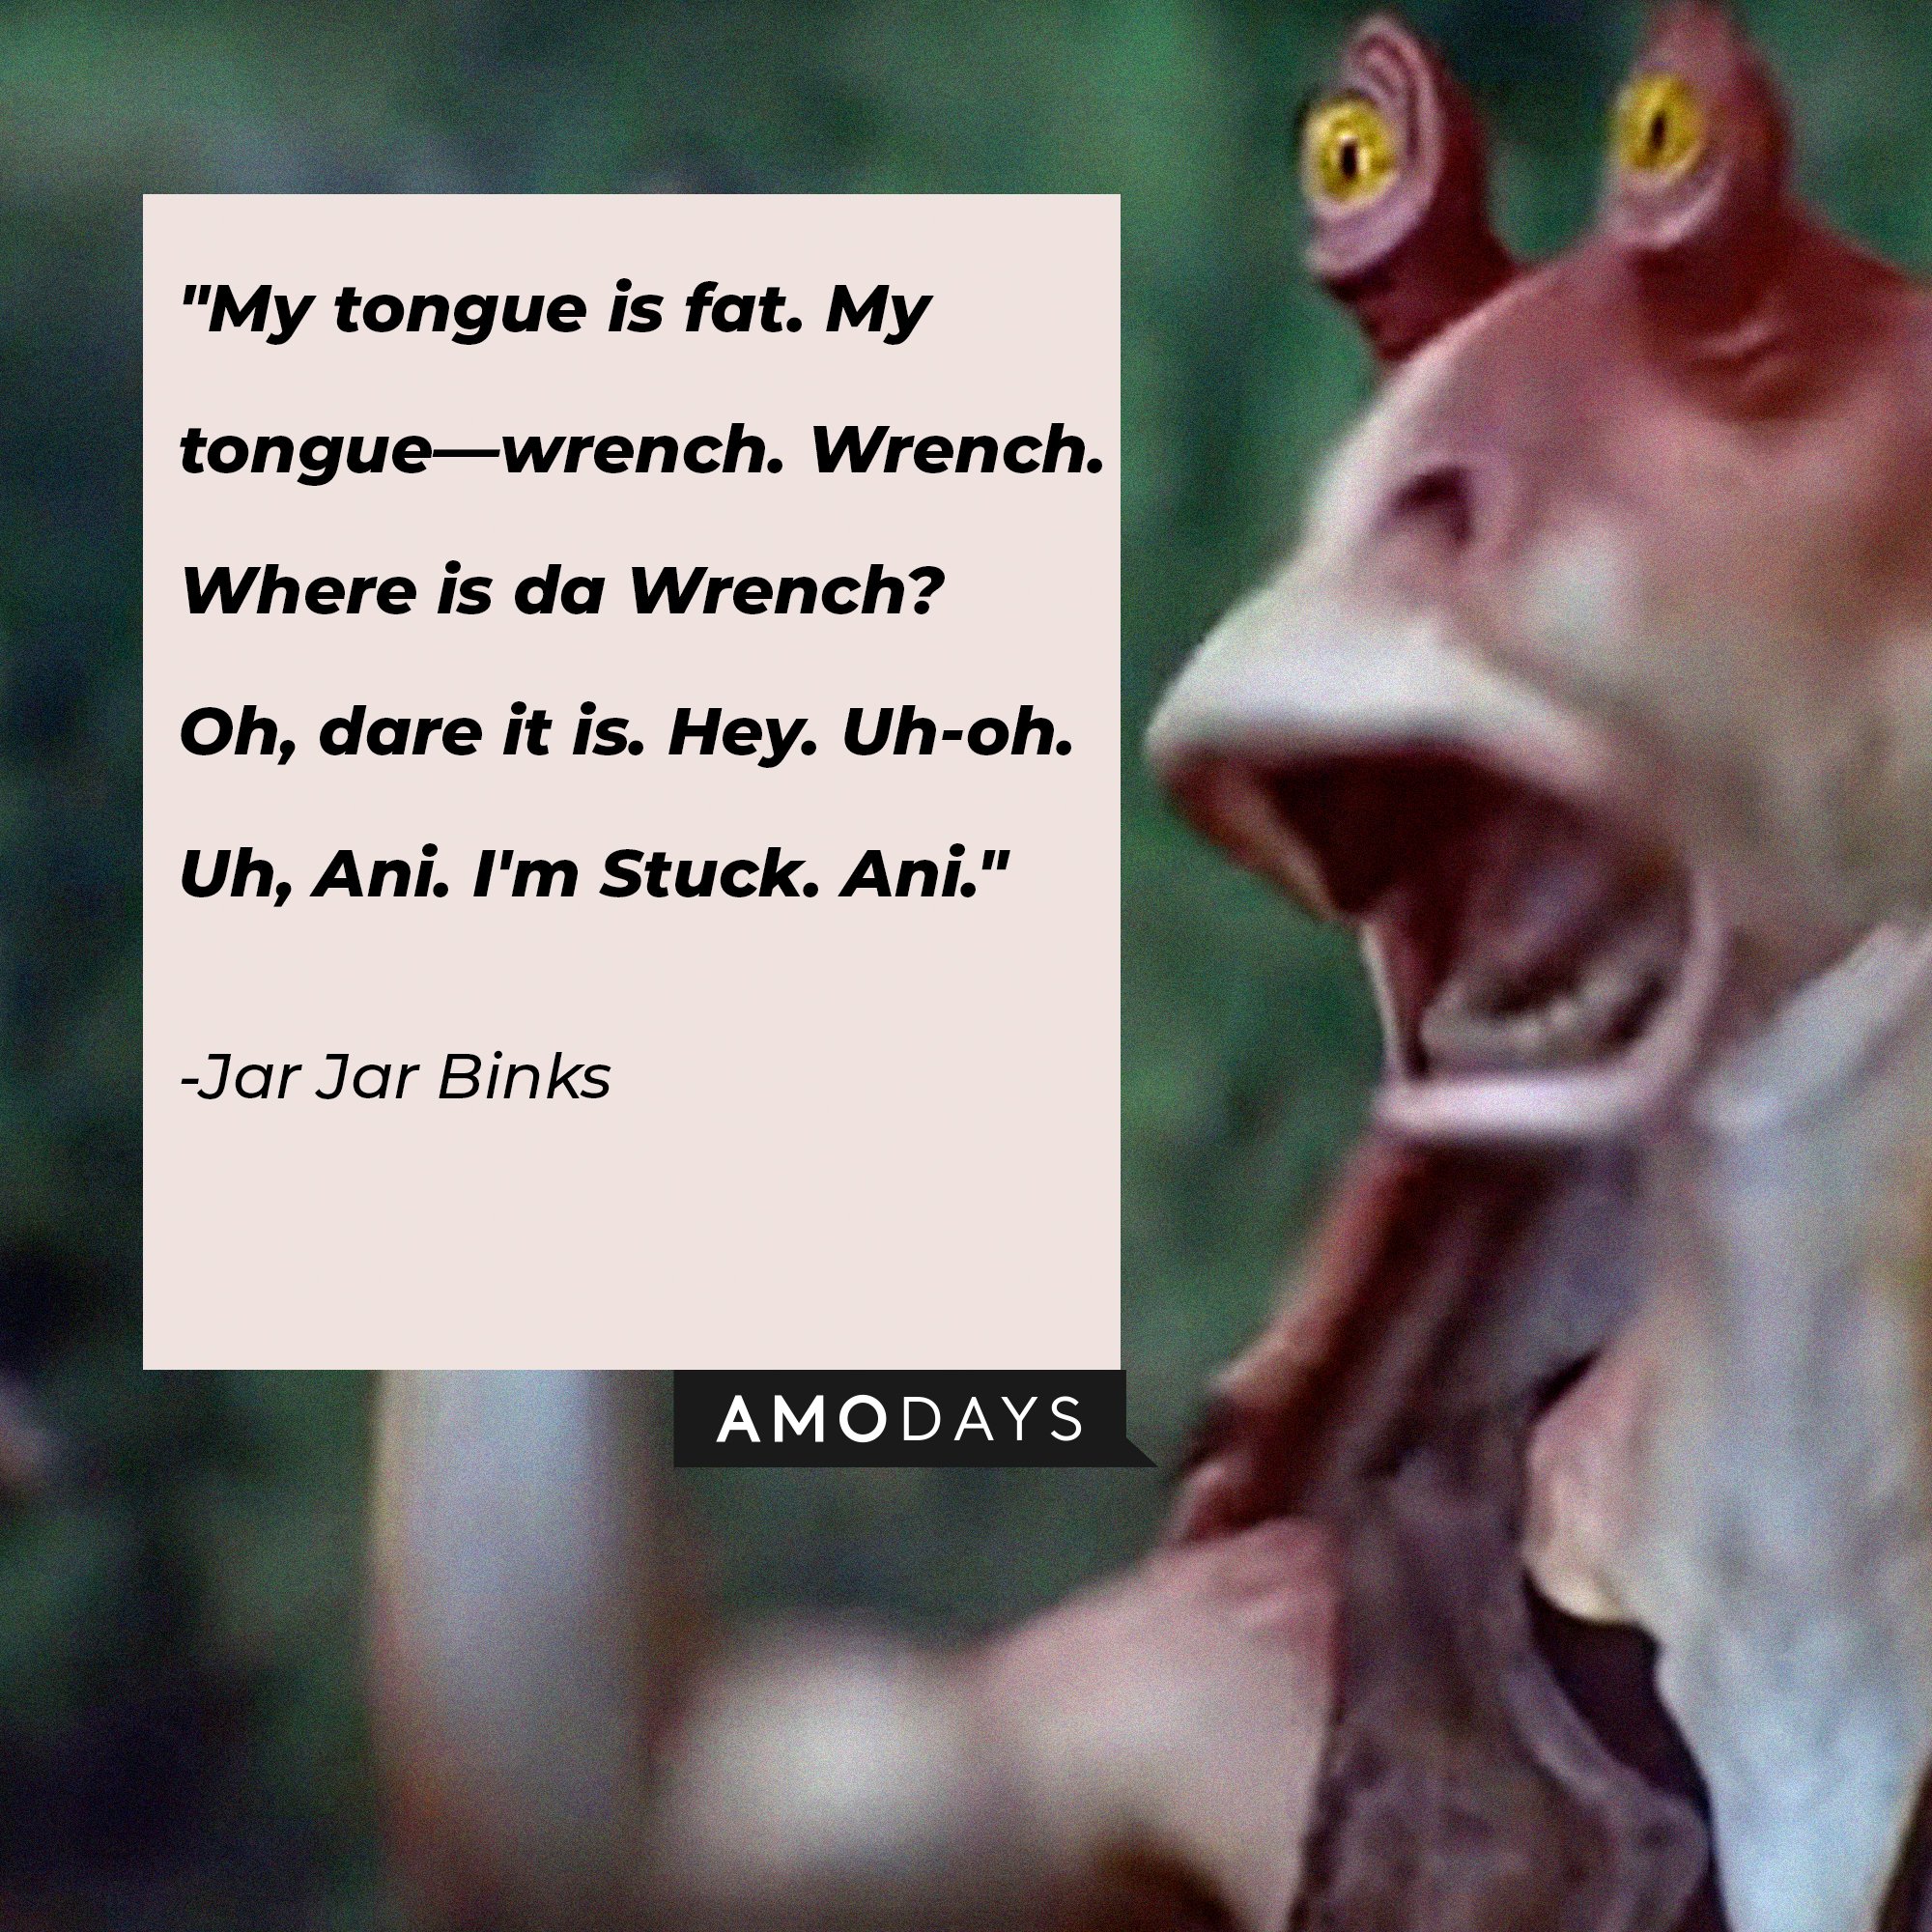  Jar Jar Binks’ quote: "My tongue is fat. My tongue—wrench. Wrench. Where is da Wrench? Oh, dare it is. Hey. Uh-oh. Uh, Ani. I'm Stuck. Ani." | Image: AmoDays